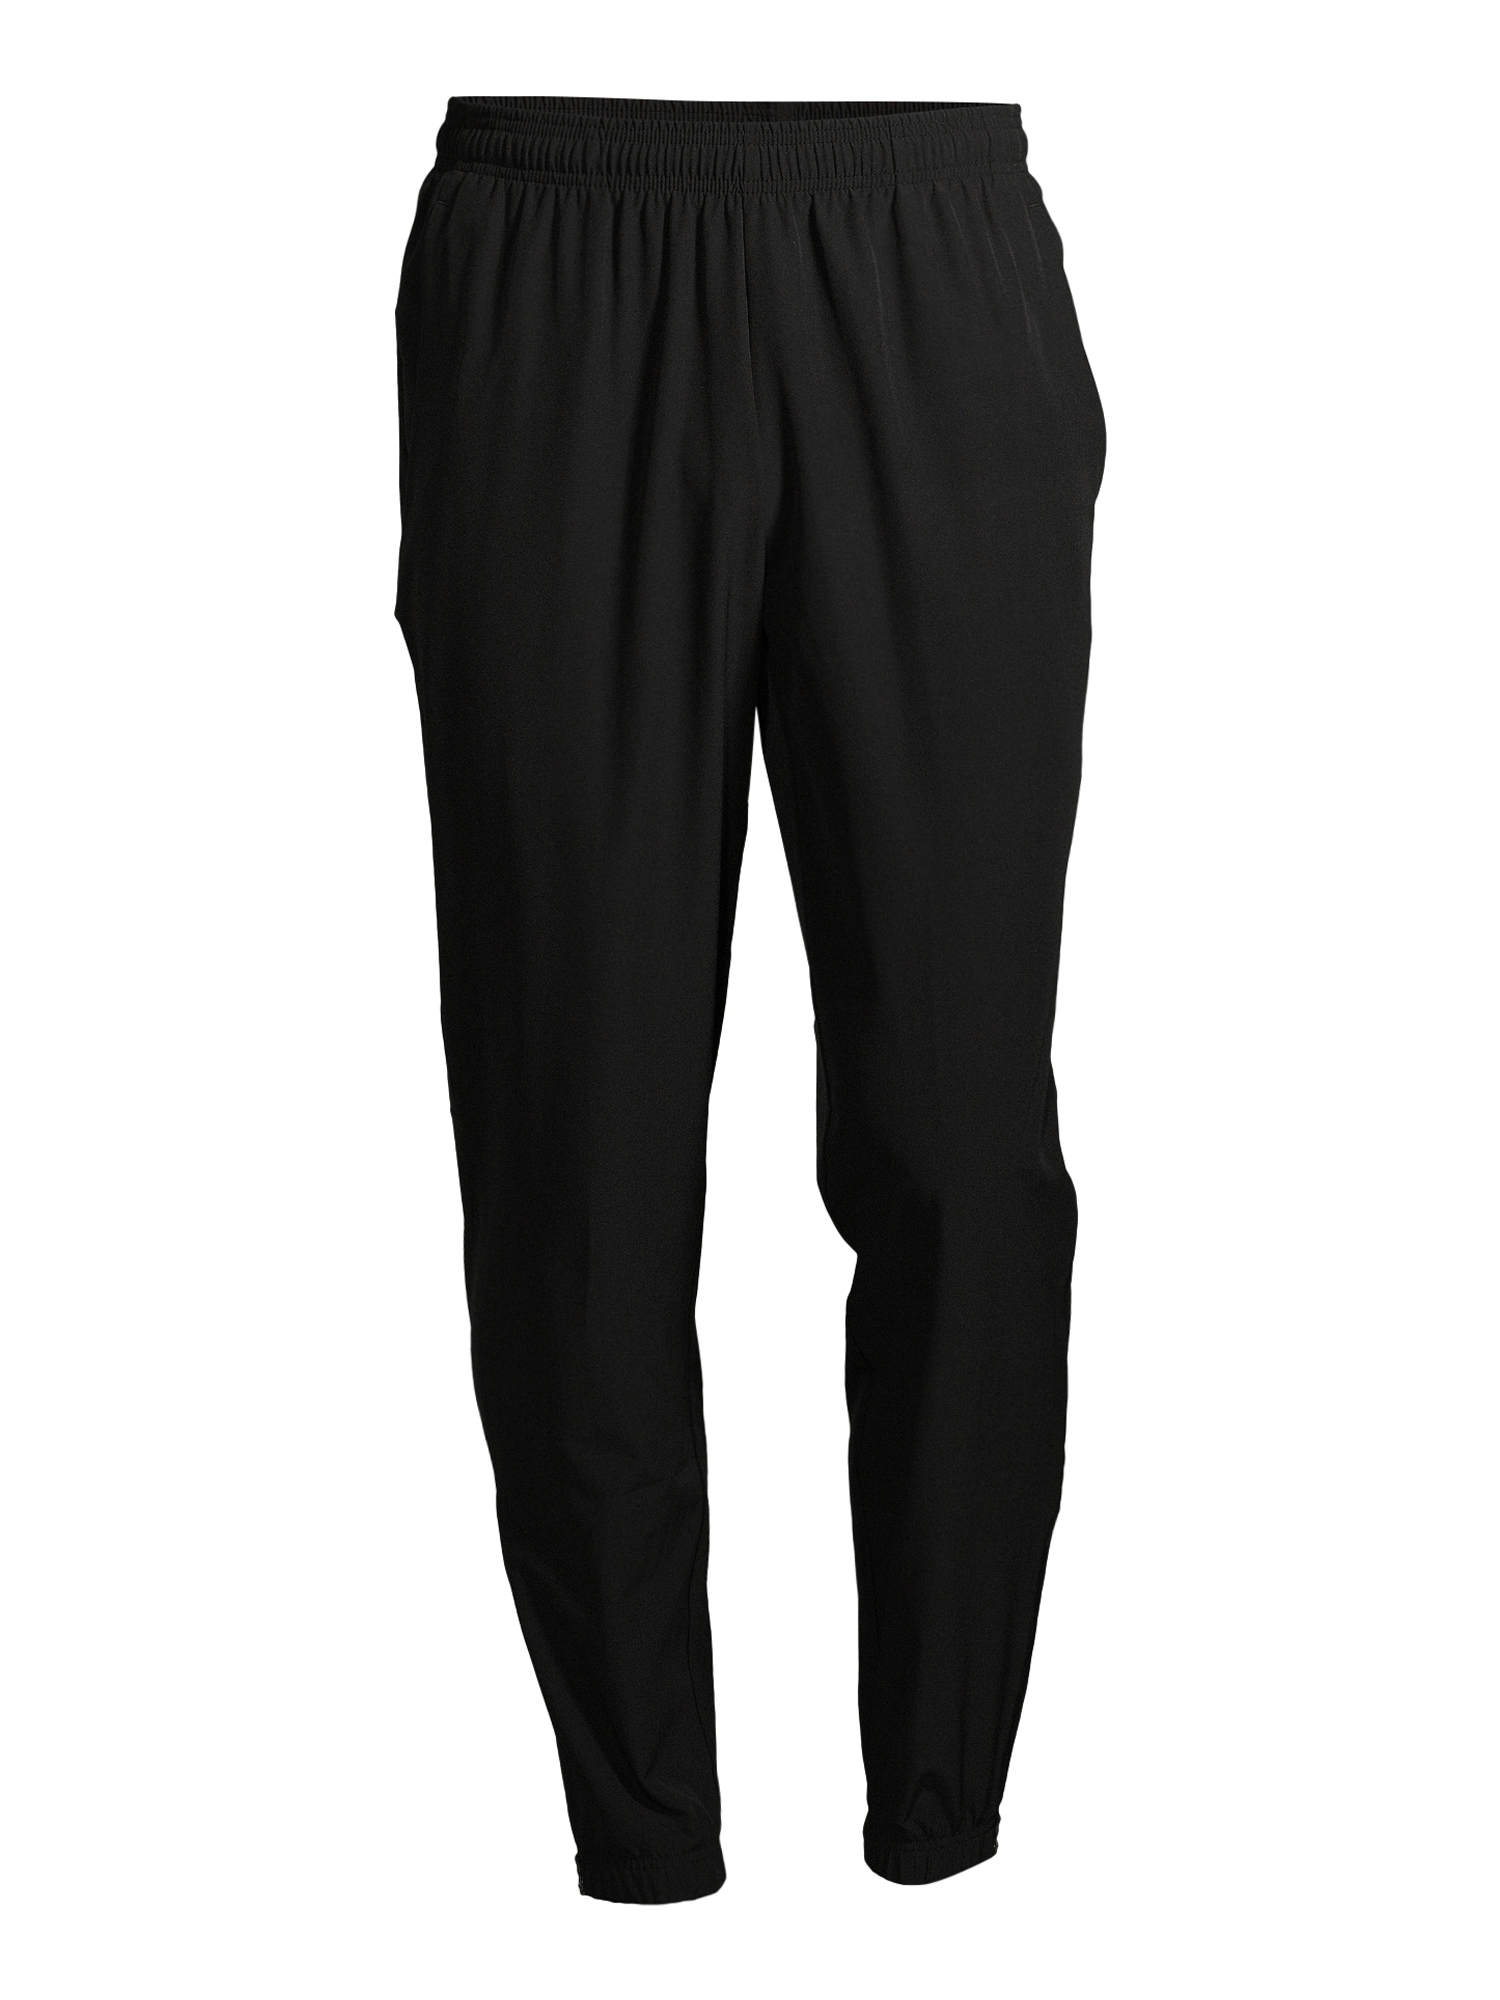 Russell Mens and Big Mens Active Woven Joggers - image 2 of 6